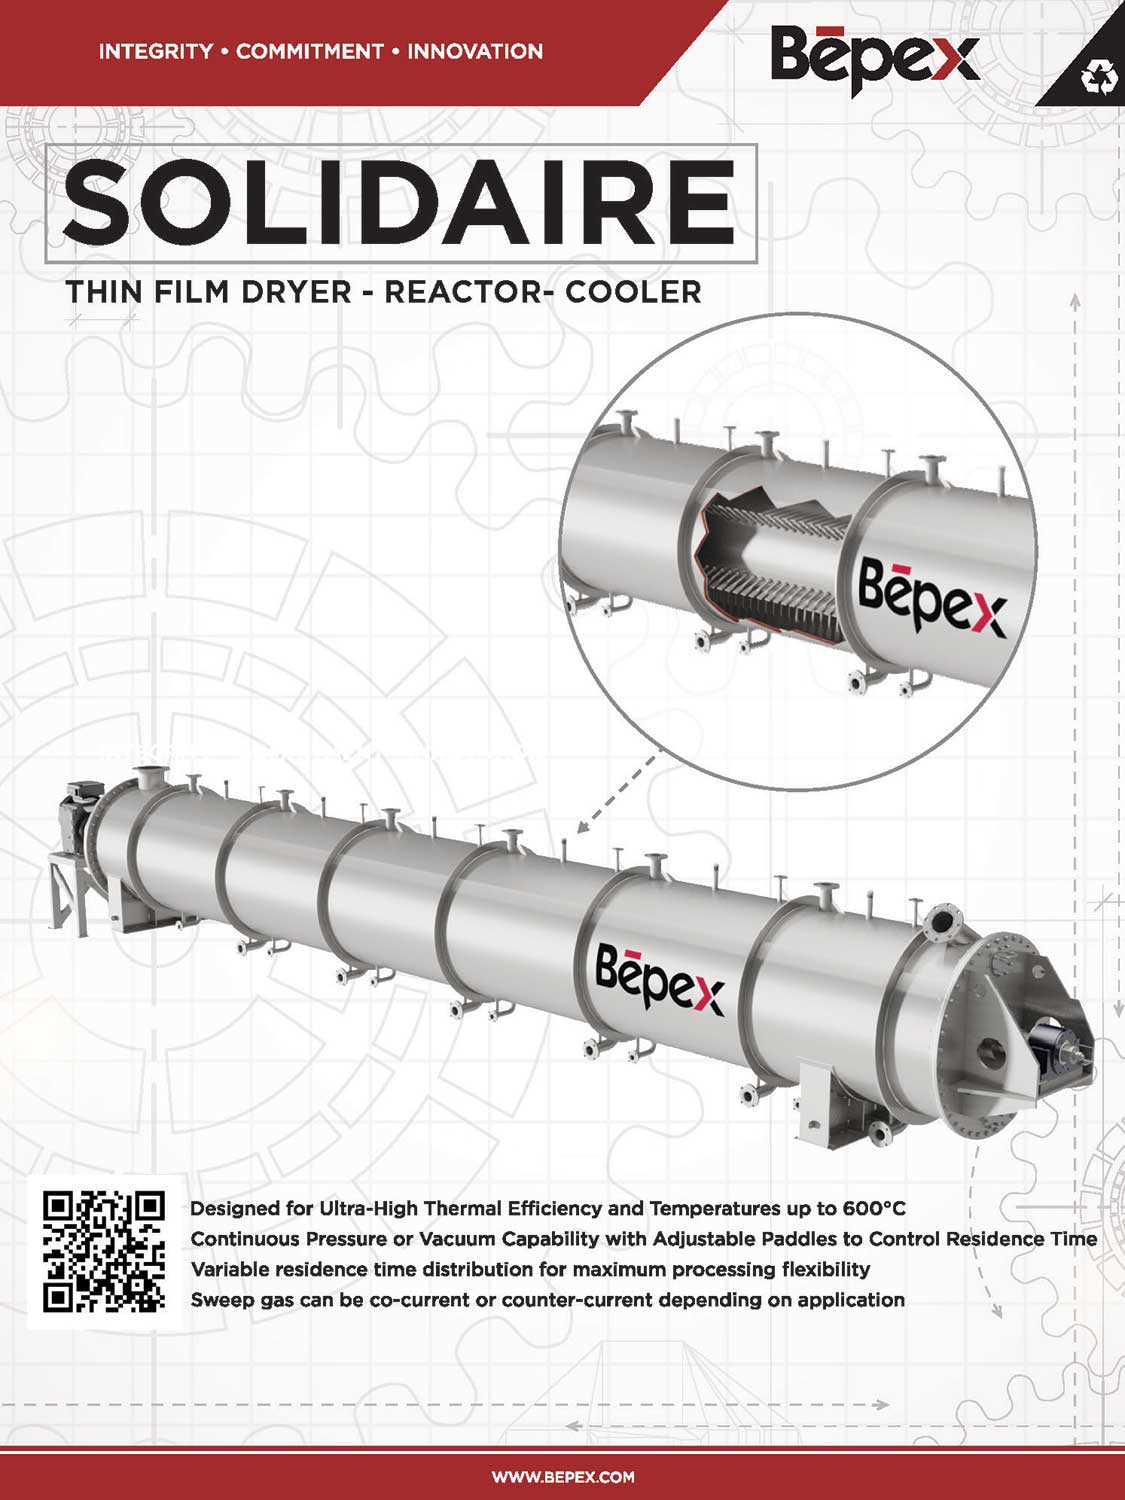 Bepex Solidaire Poster